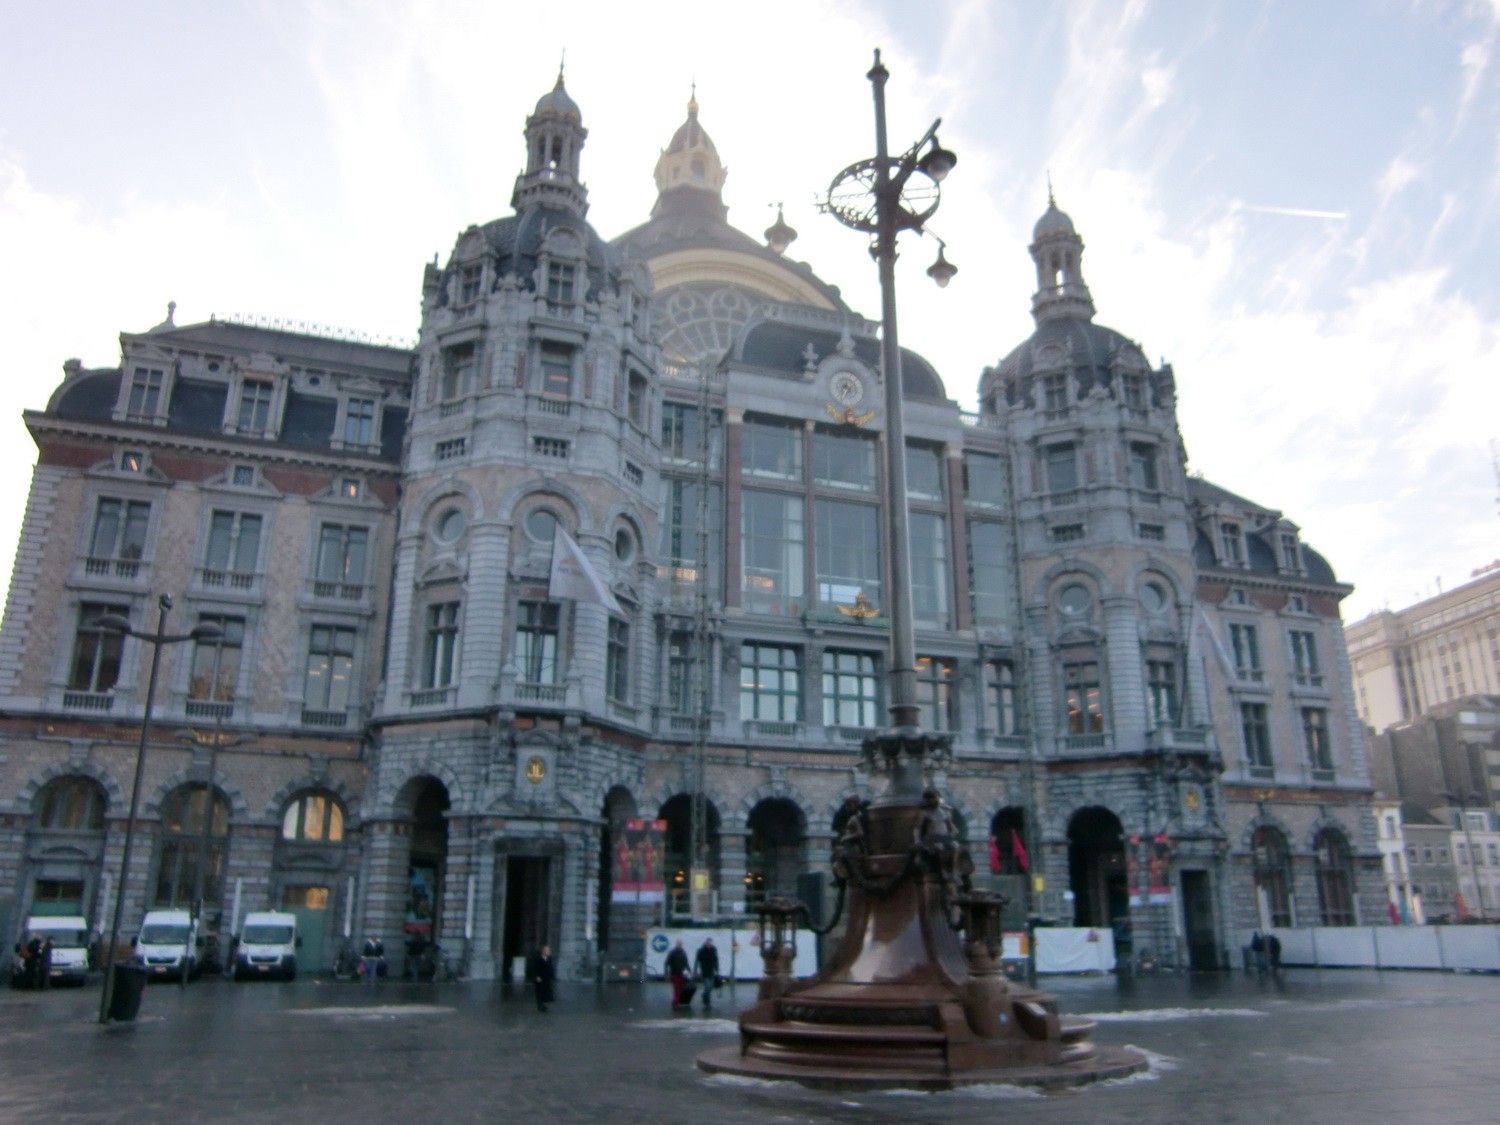 The very impressive central station of Antwerp